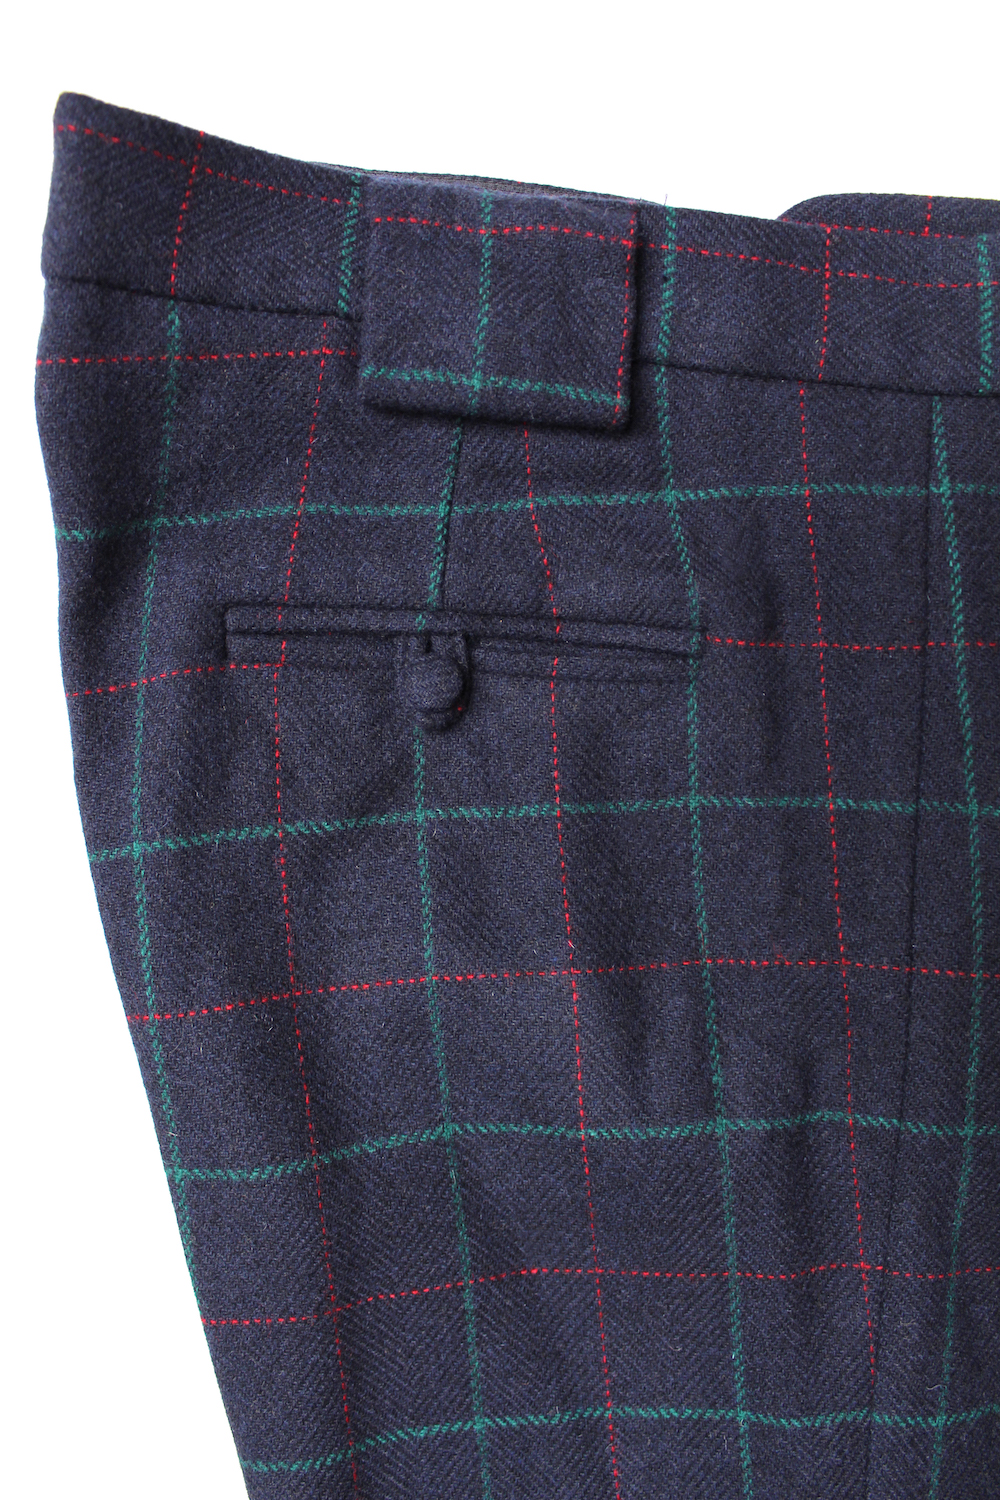 Navy blue, green and red over-check trousers with covered buttons ...